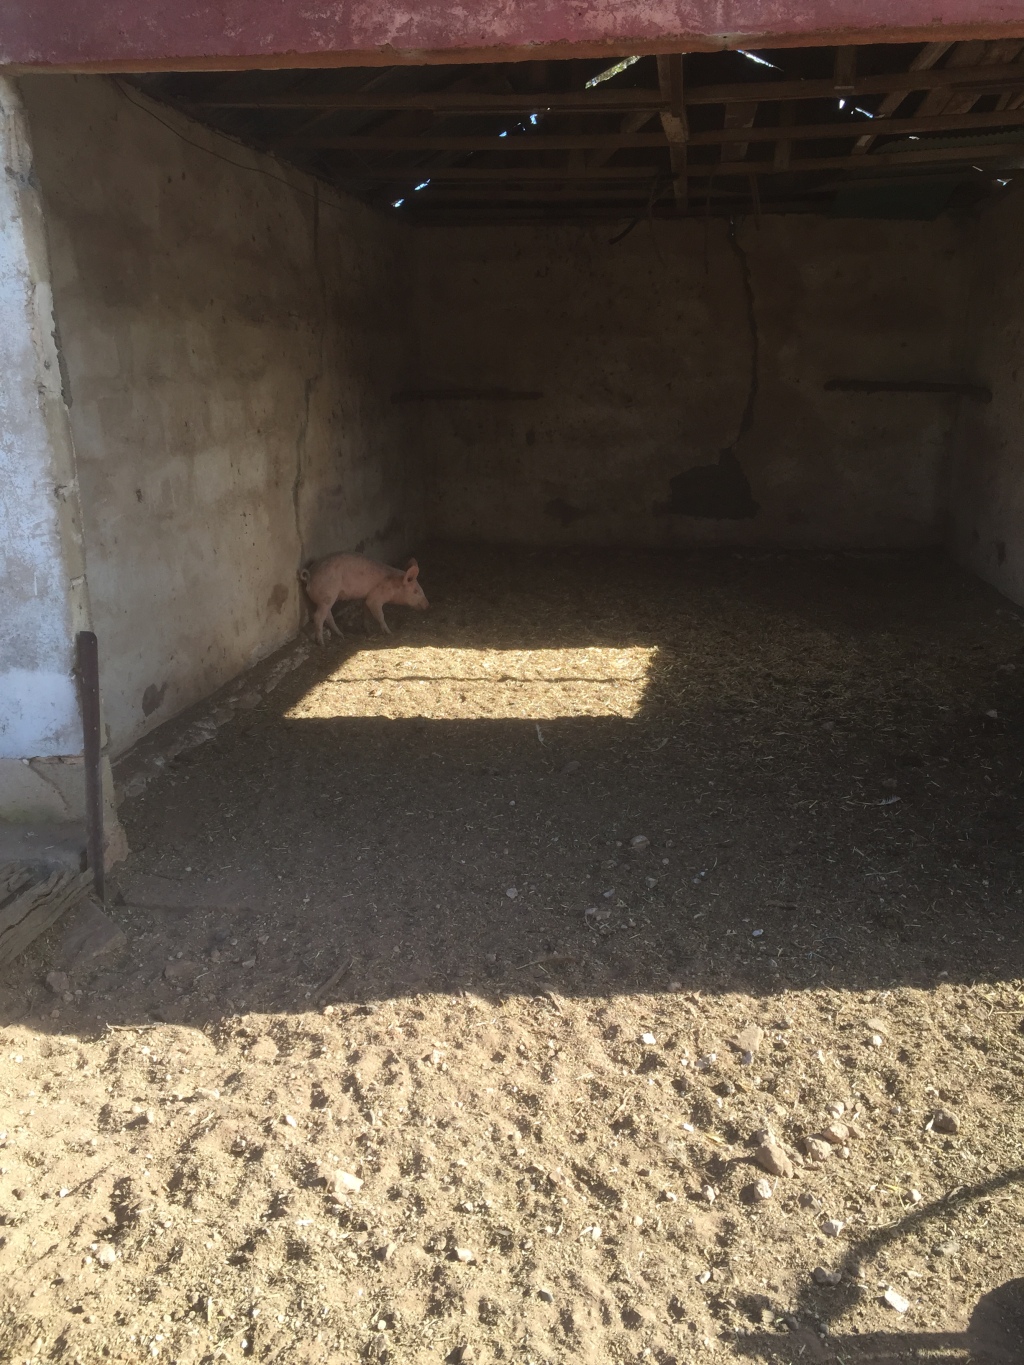 Inside the old chook shed, which is now one of my farrowing sheds.